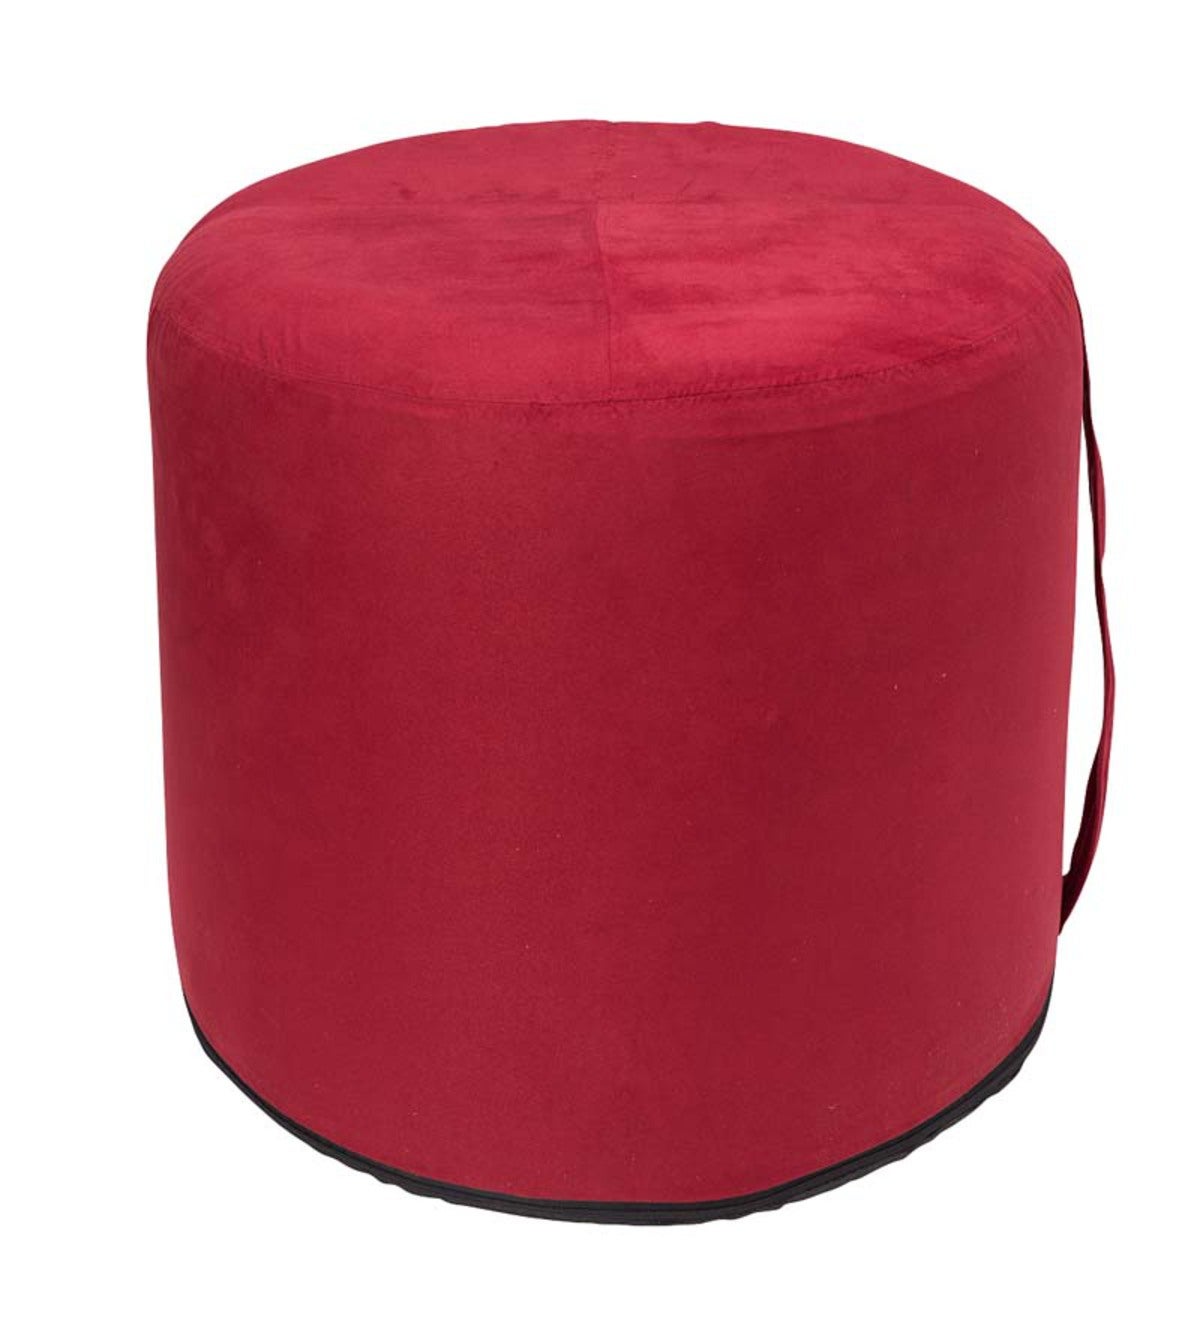 Large Round Inflatable Indoor Ottoman Pouf - Burgundy